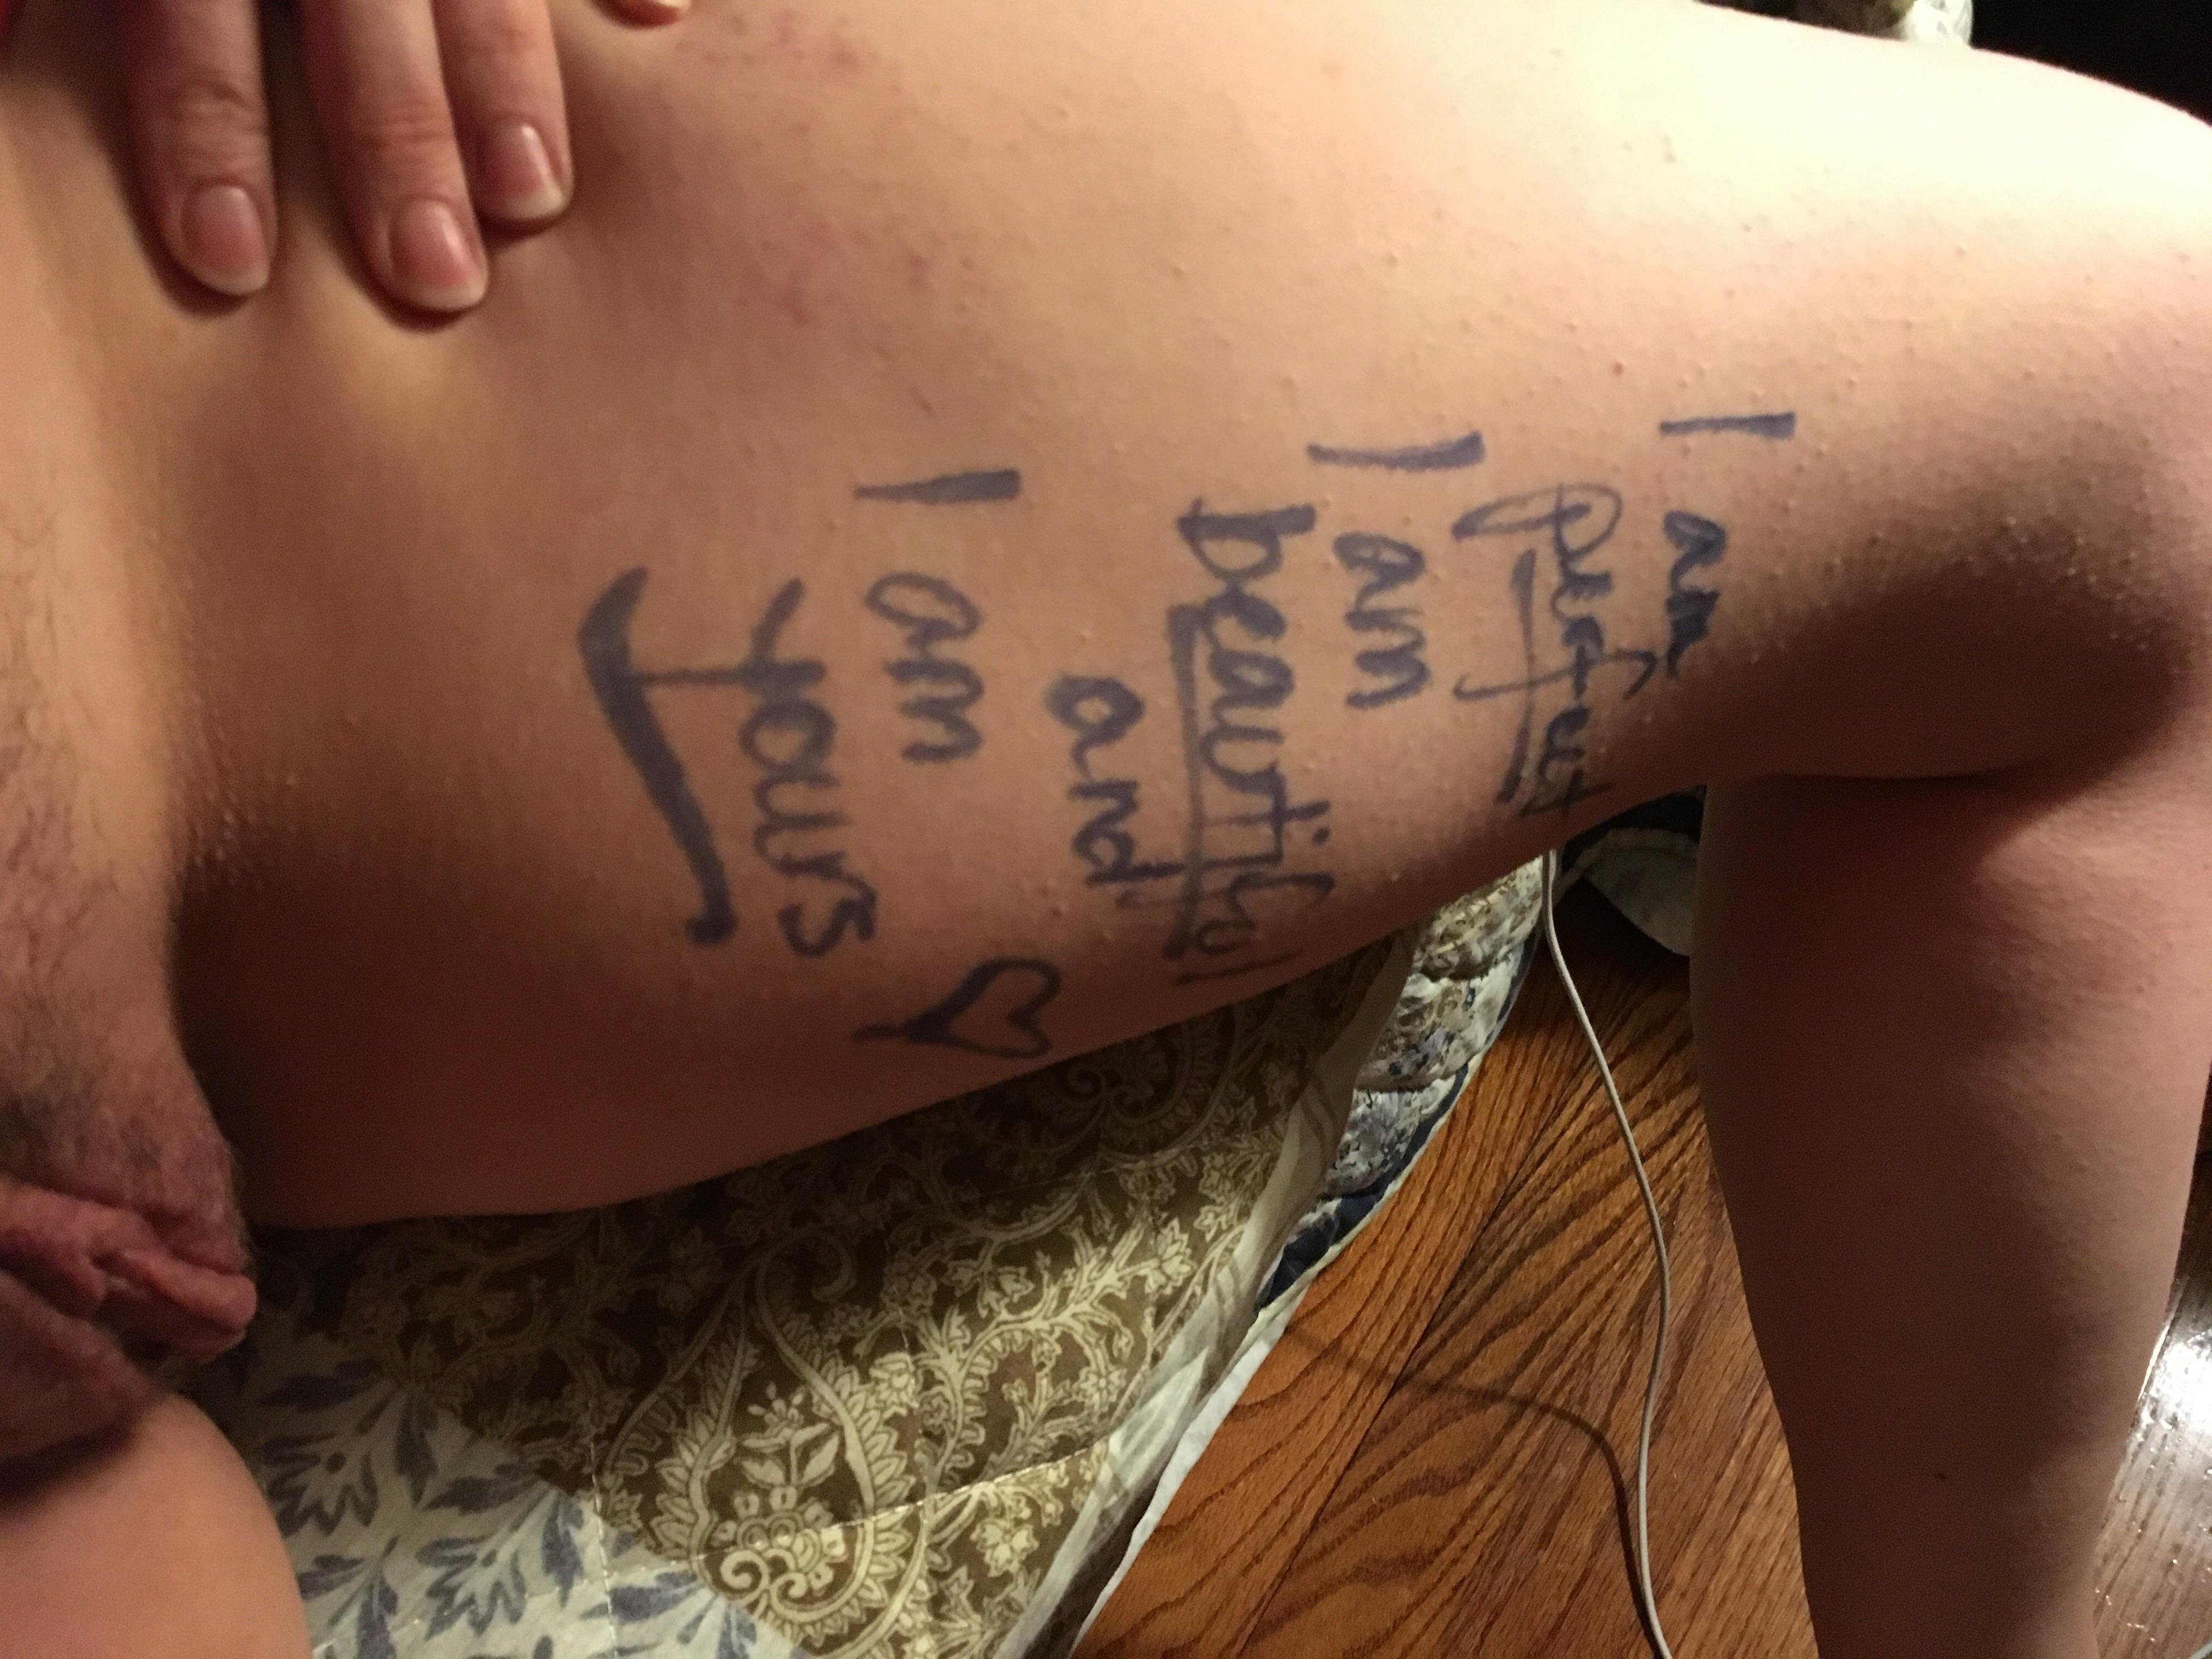 [F] Body-writing doesn’t have to be humiliating or dehumanizing.